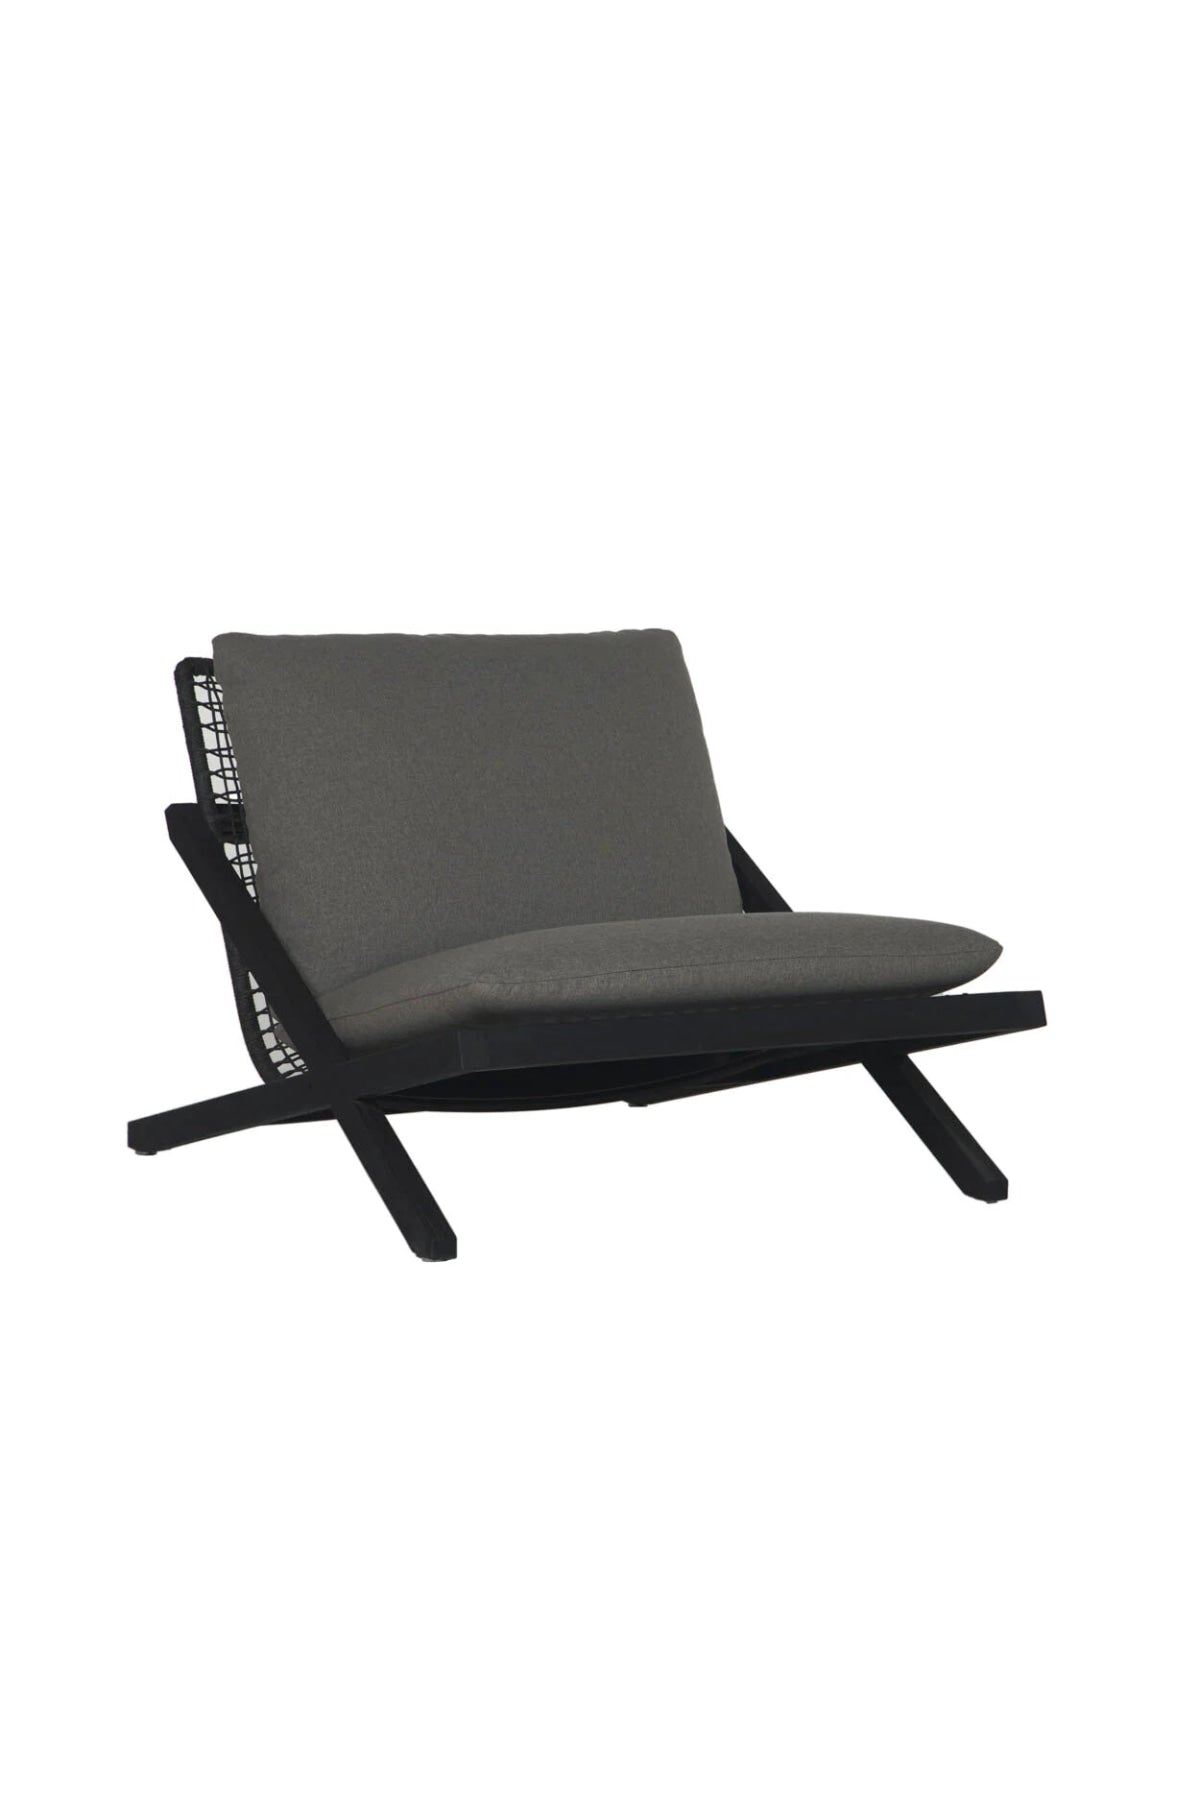 Venice Outdoor Lounge Chair - Charcoal